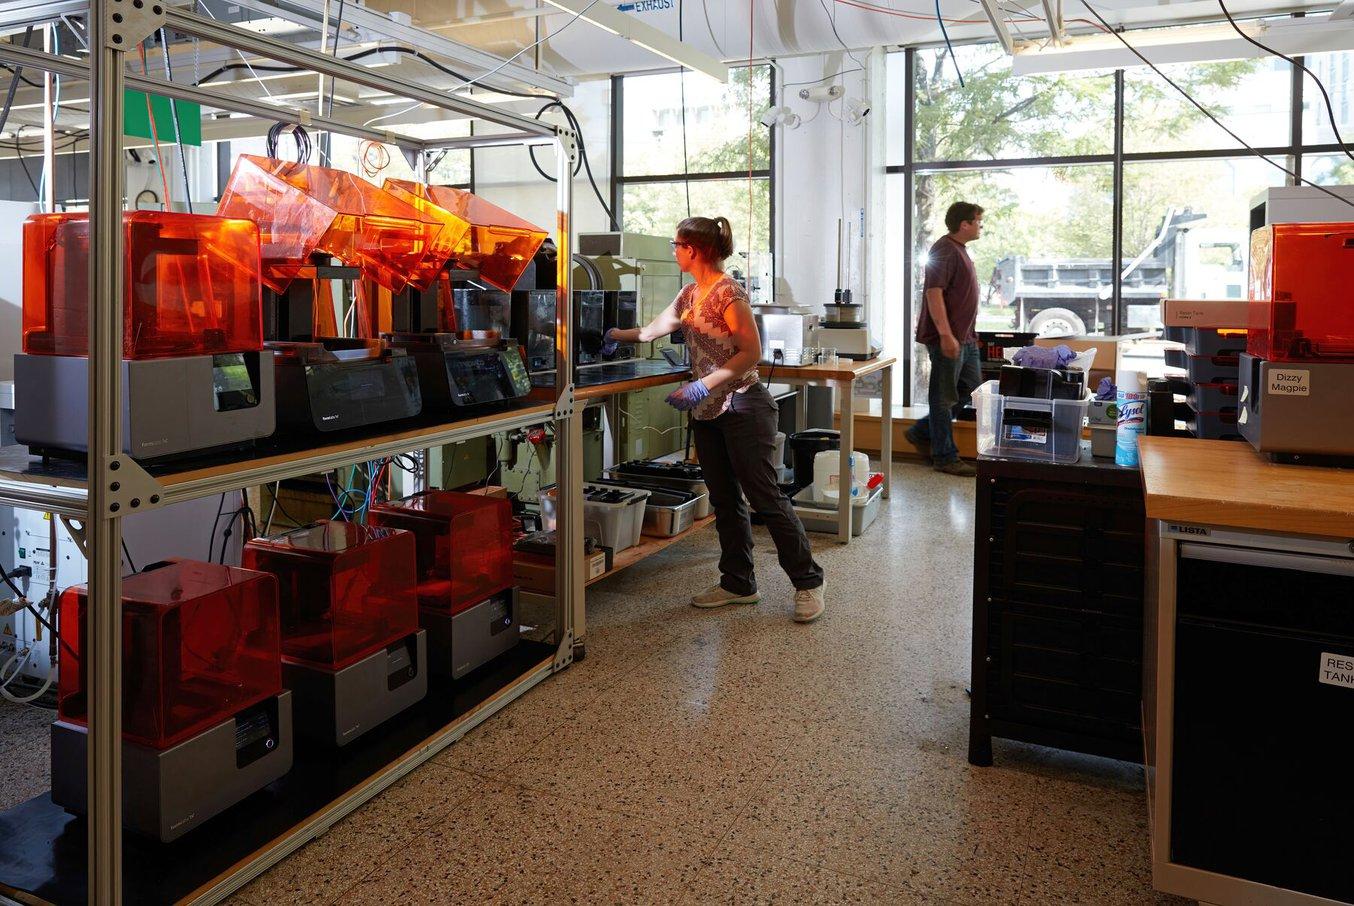 A woman uses equipment next to a rack of six 3D printers.